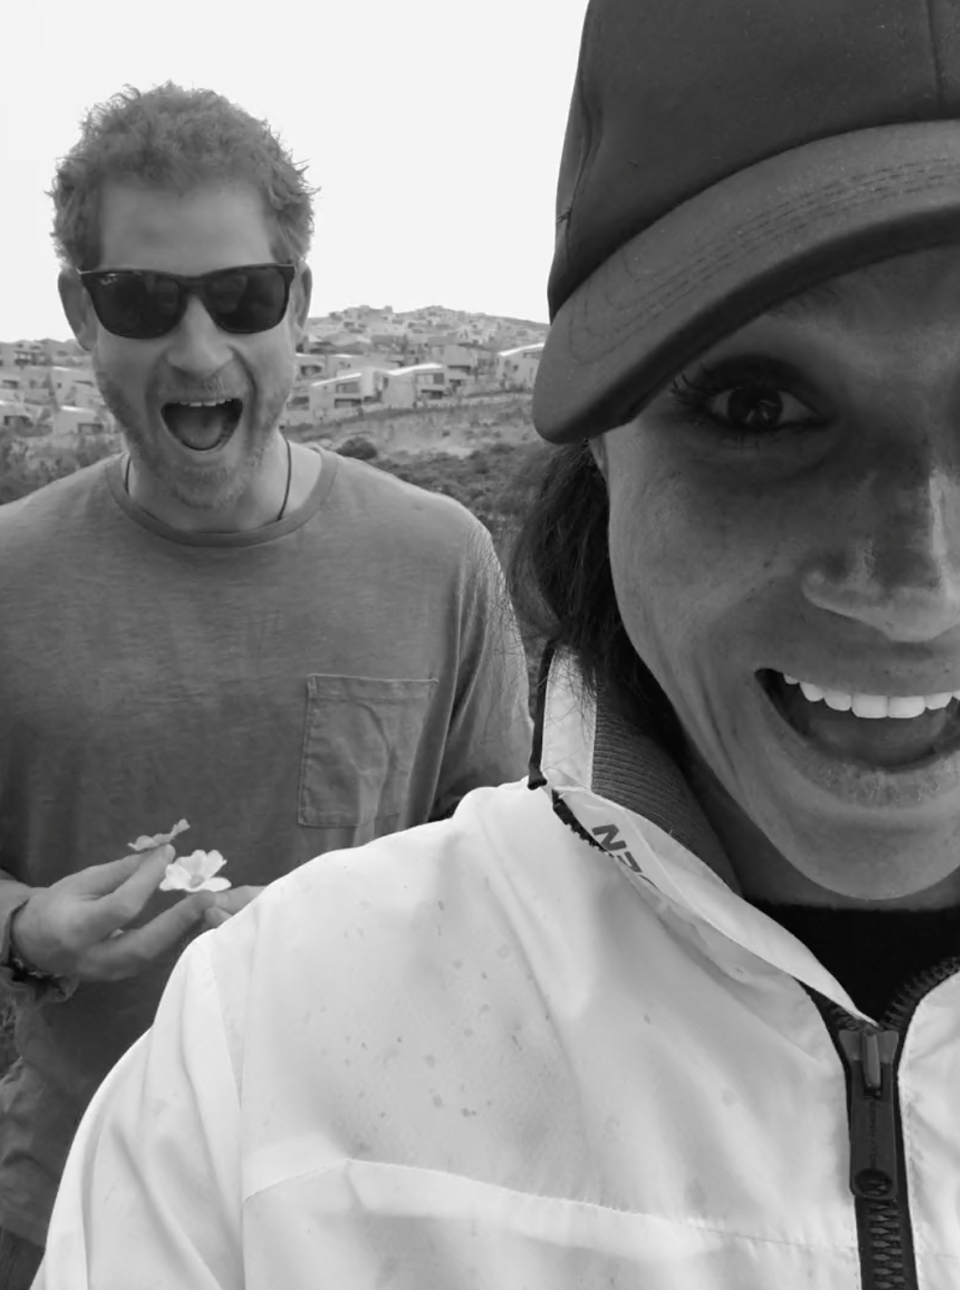 Meghan takes a selfie with Harry, and he pulls a face.